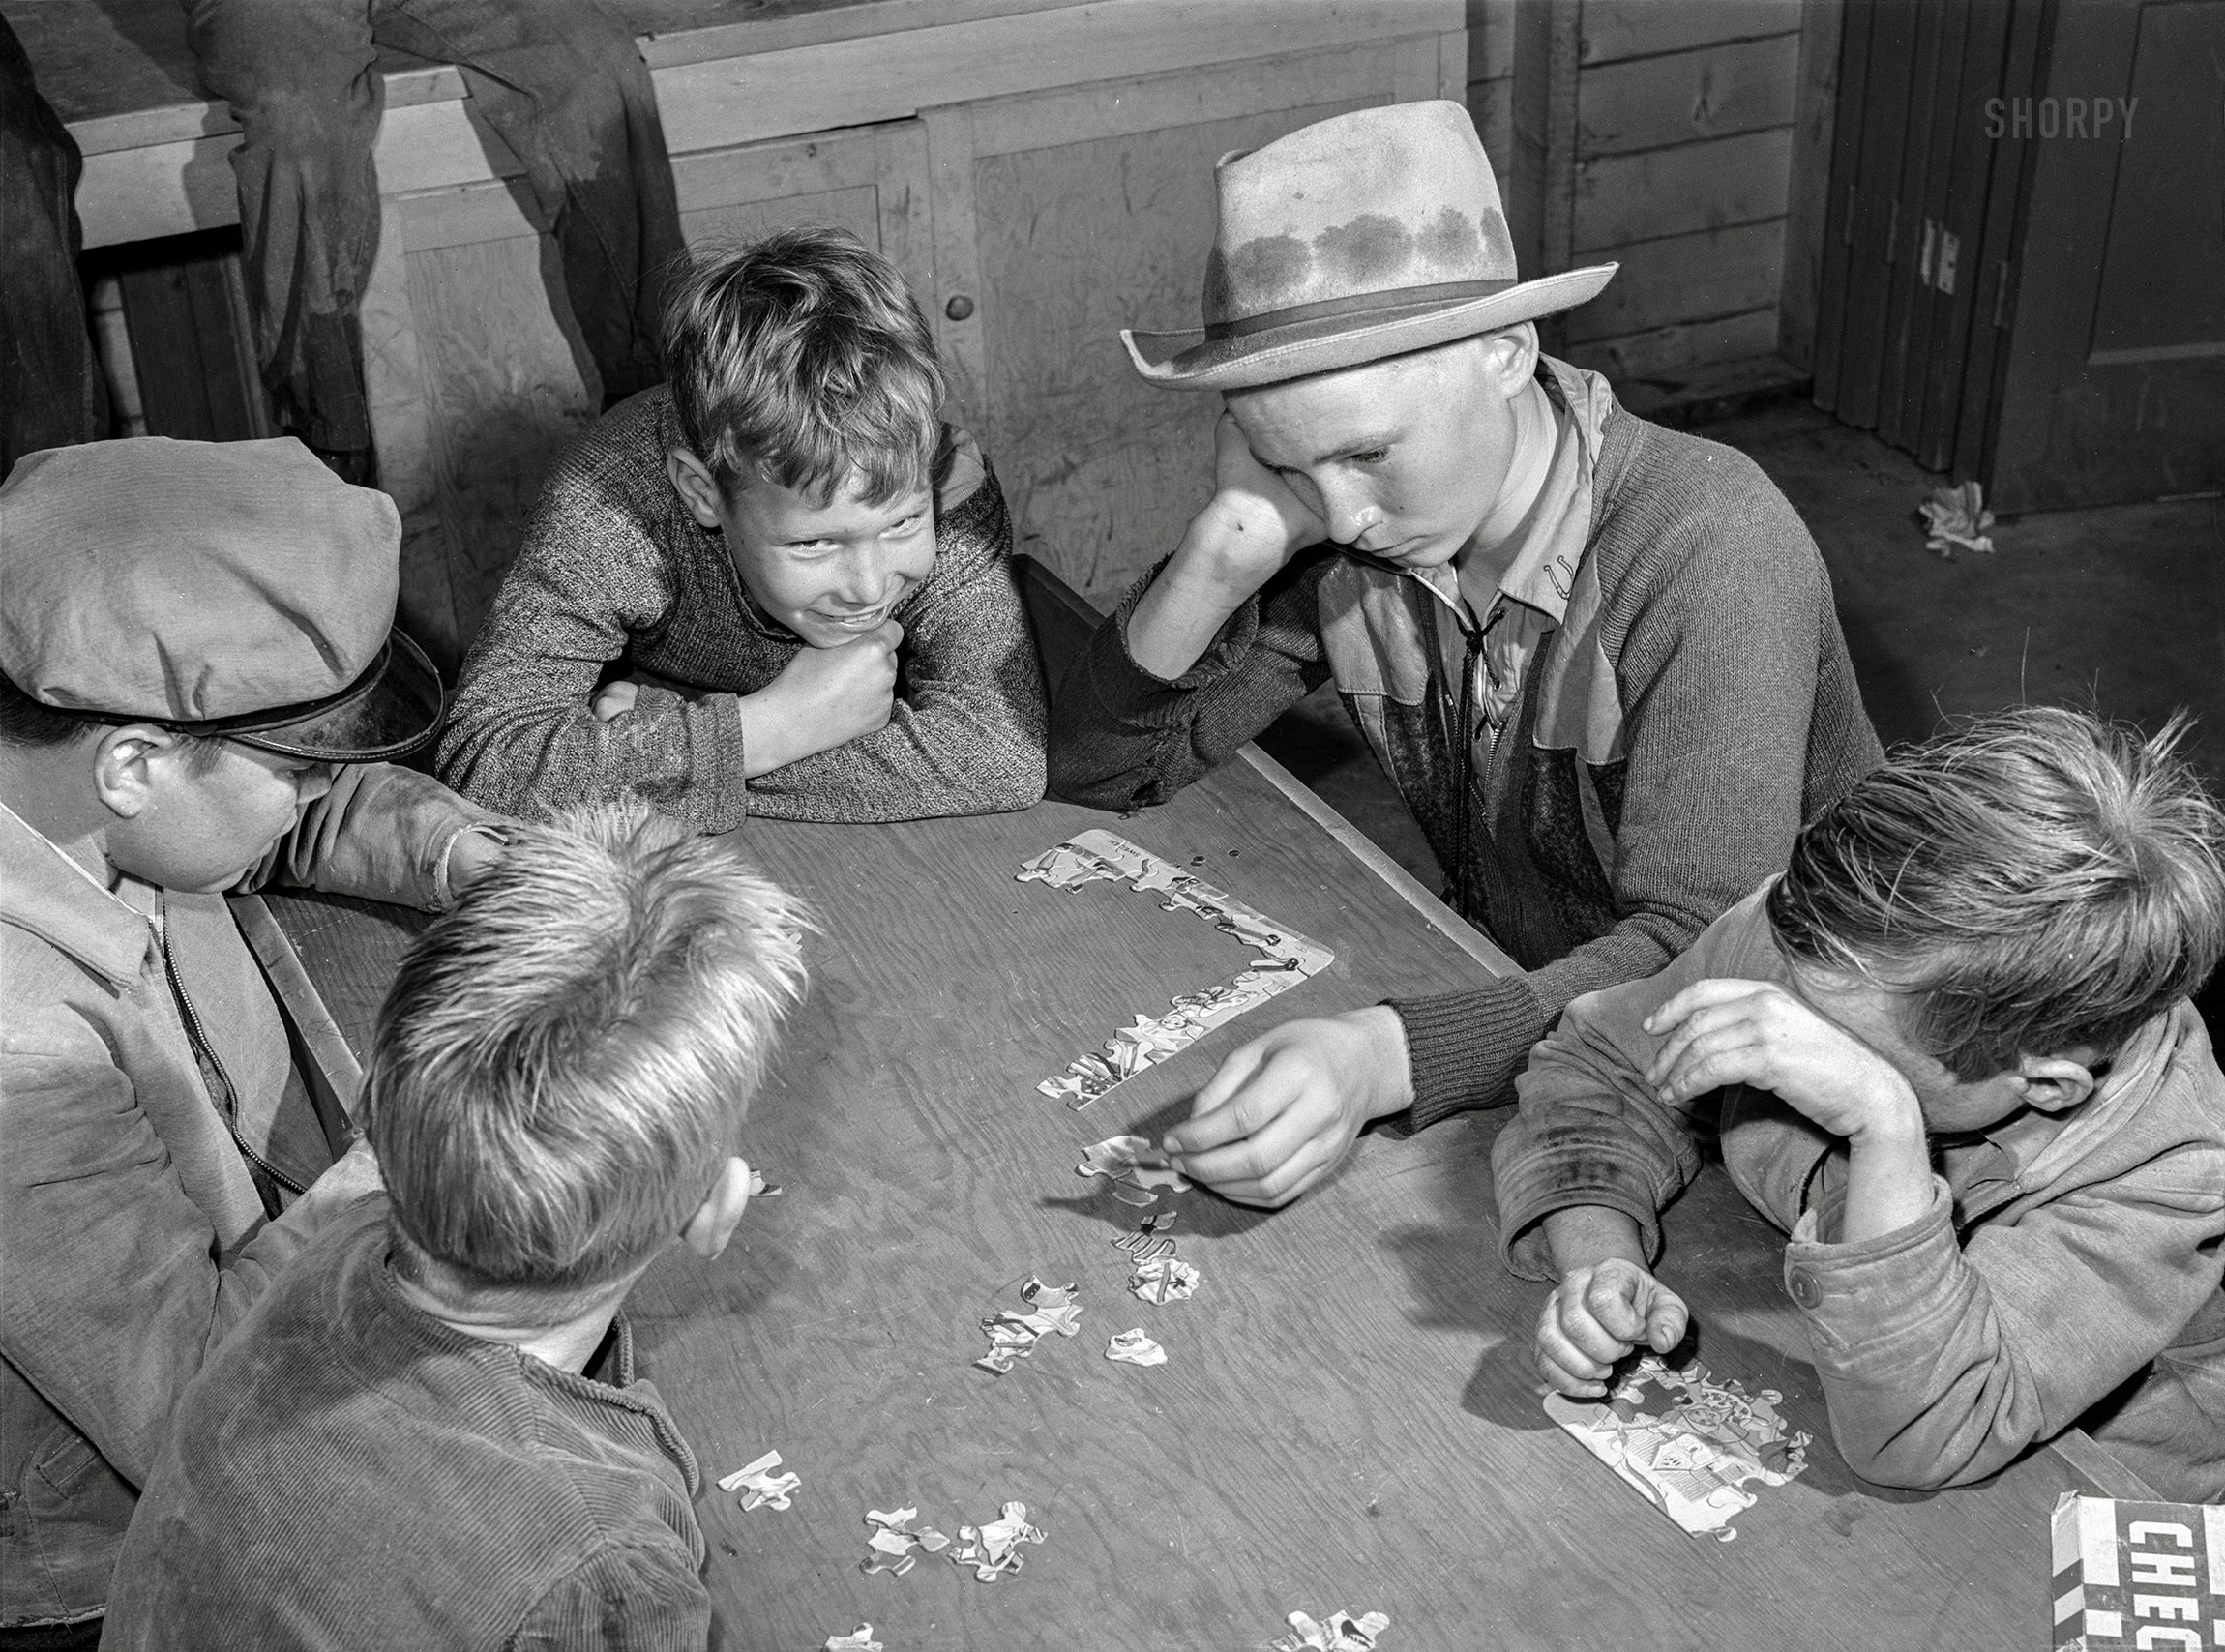 January 1942. Woodville, California. "FSA farm workers' community. Games are played in the recreation room in the community building." Medium format acetate negative by Russell Lee for the Farm Security Administration. View full size.